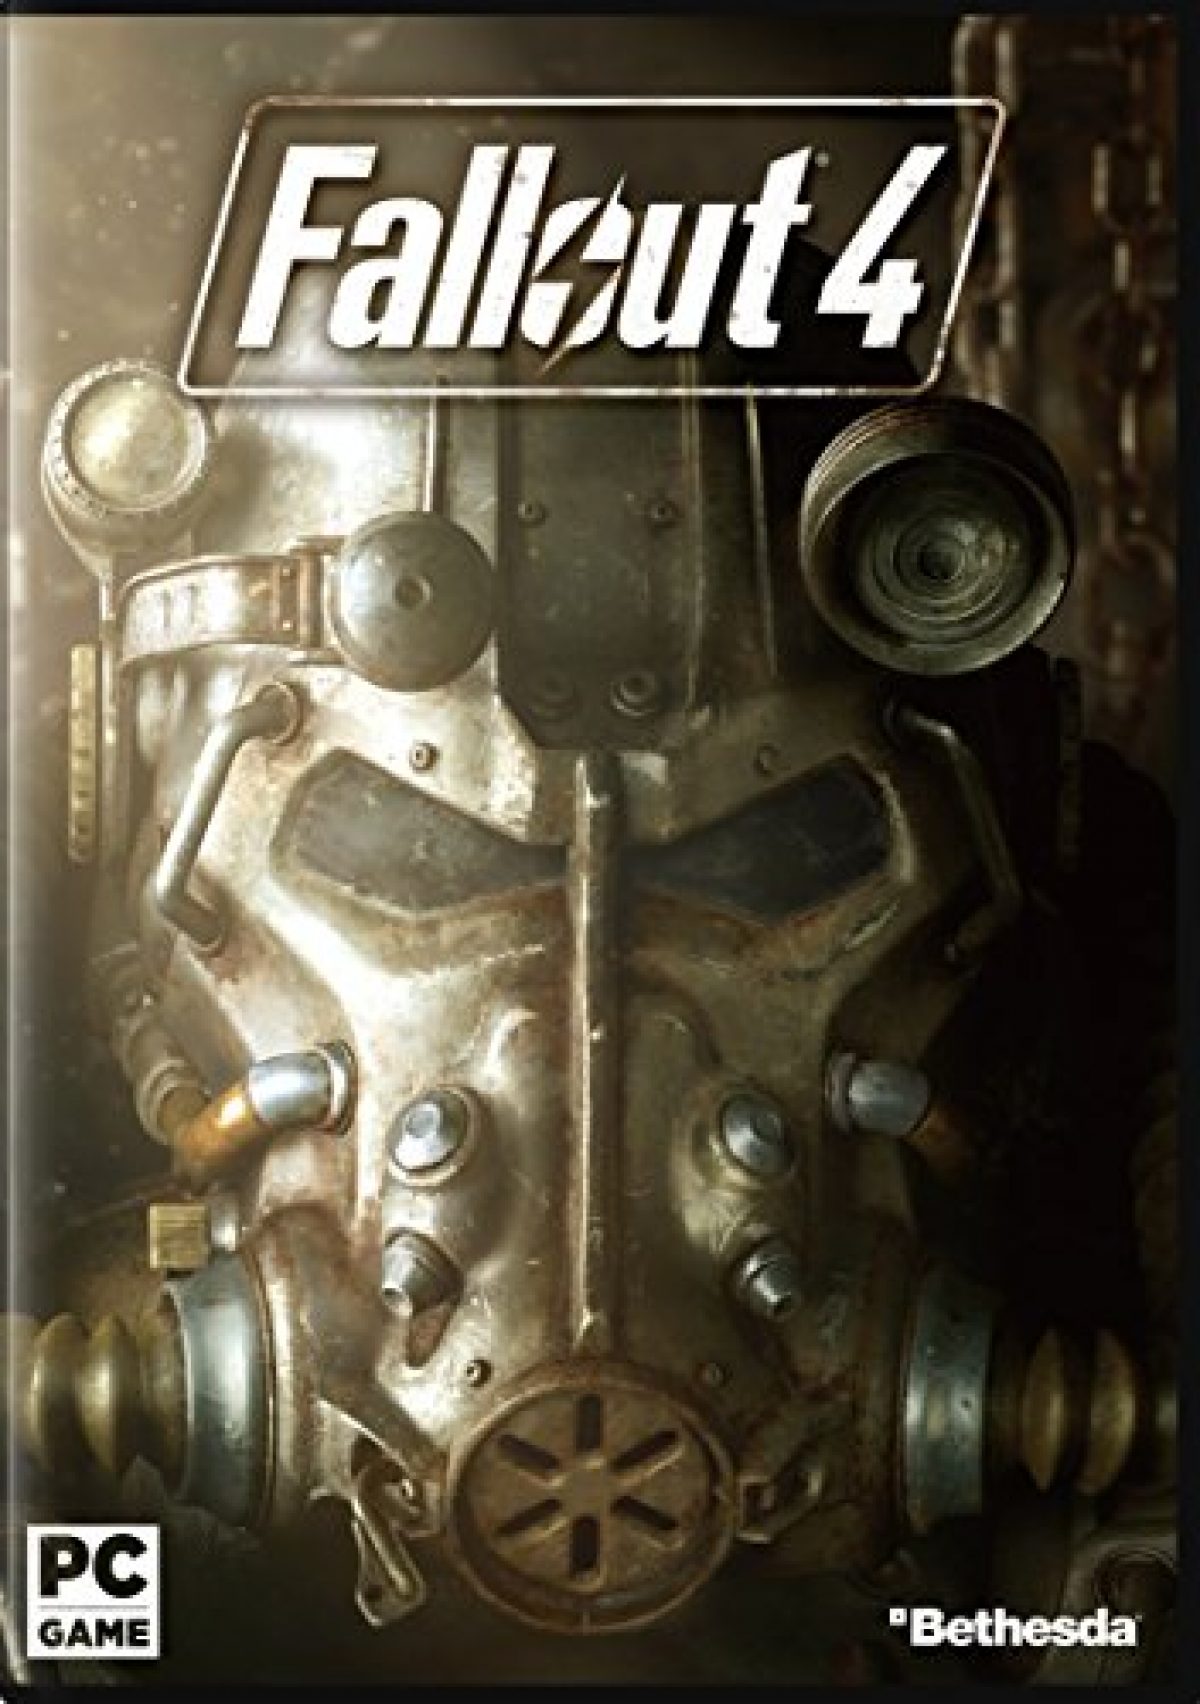 Pc版fallout4は21 9の解像度を公式にサポートしていない Fallout4 Recon Reviewdays